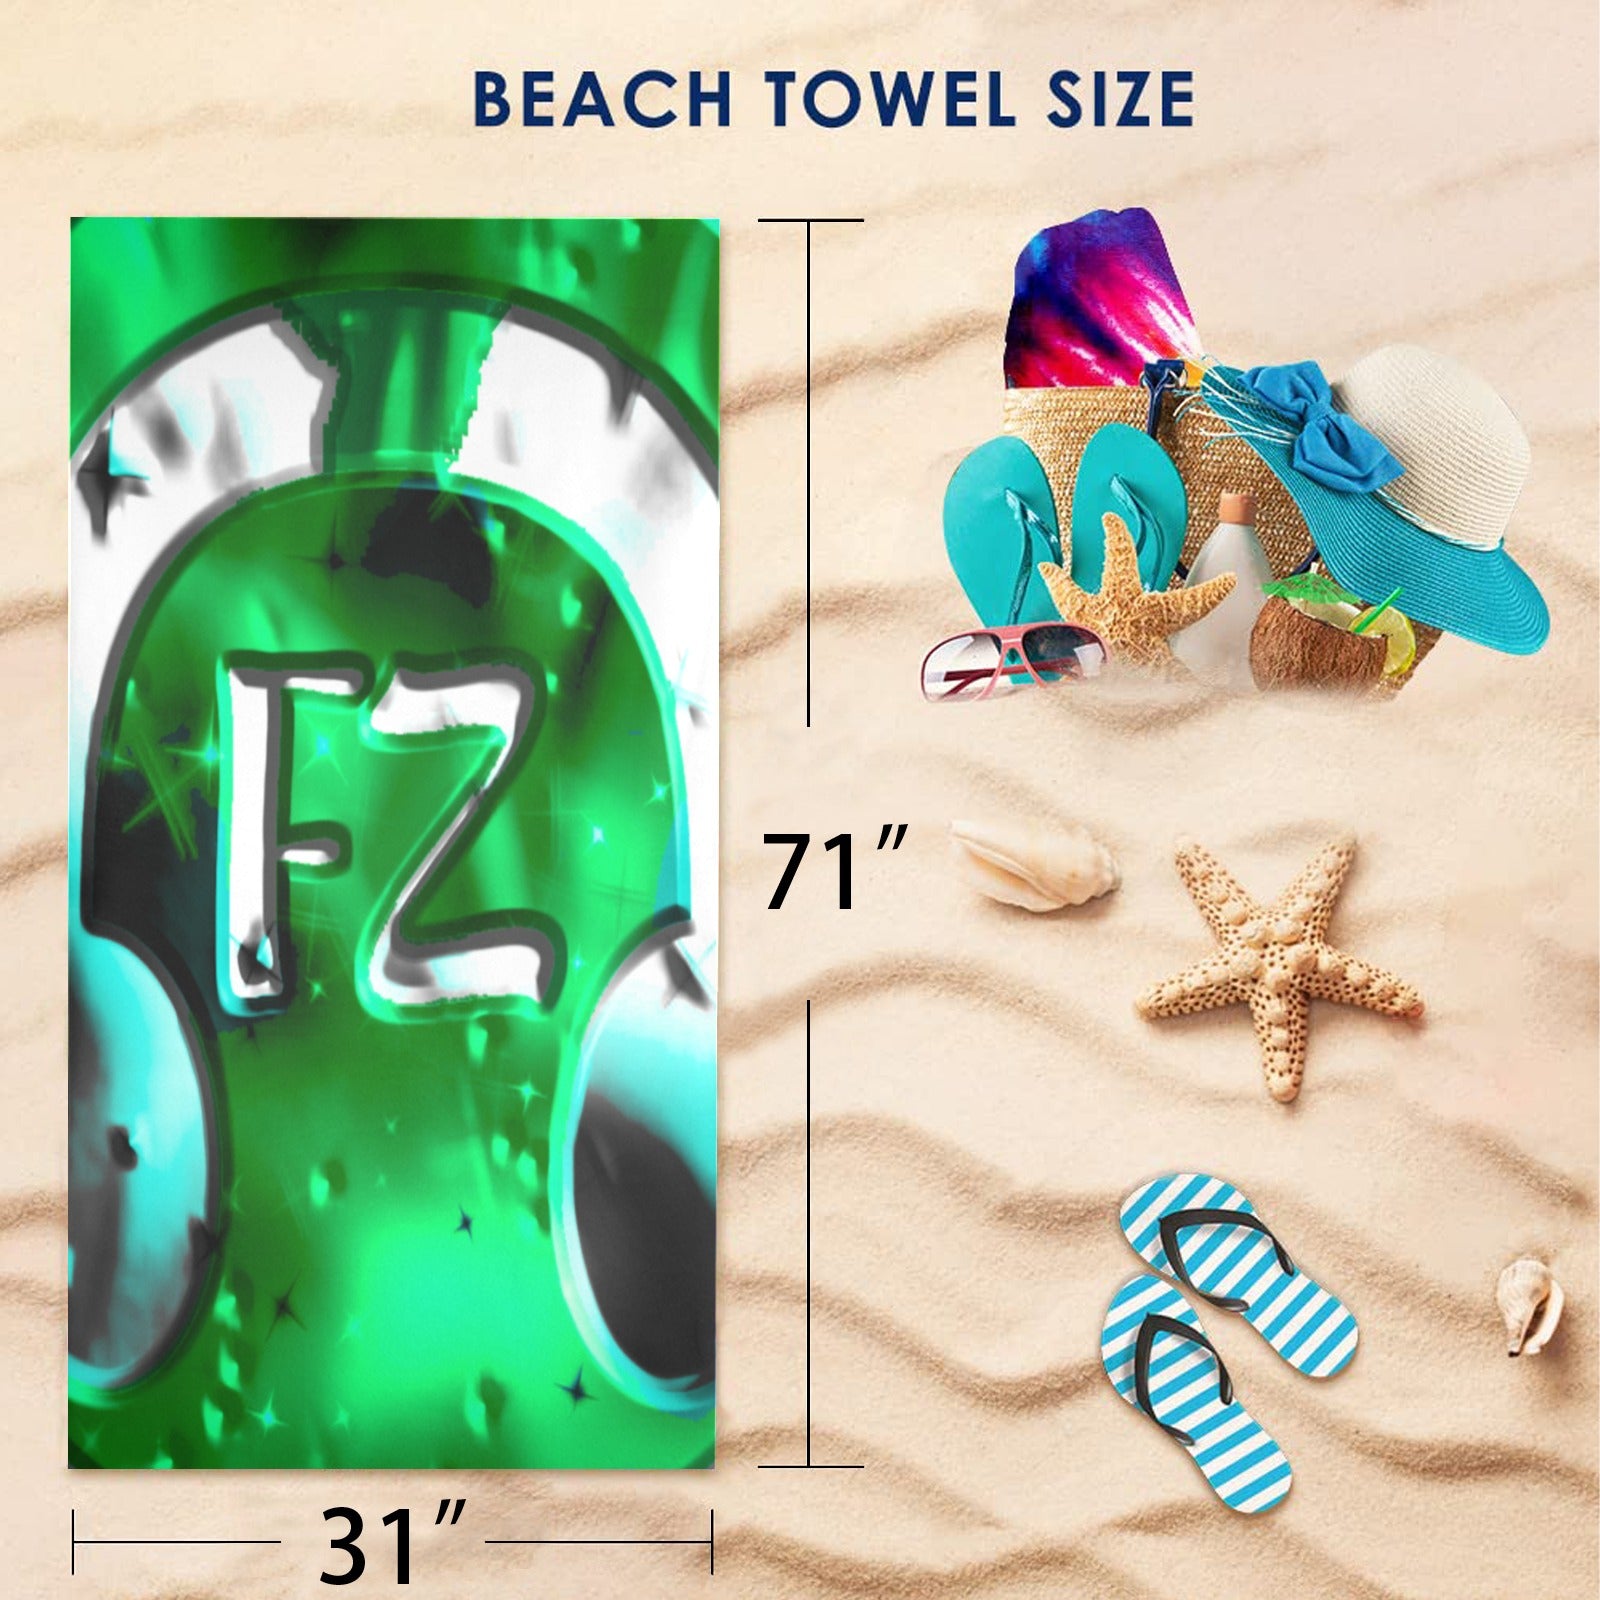 fz beach towel abstract 3 beach towel 31"x71"(two sides with different printing)